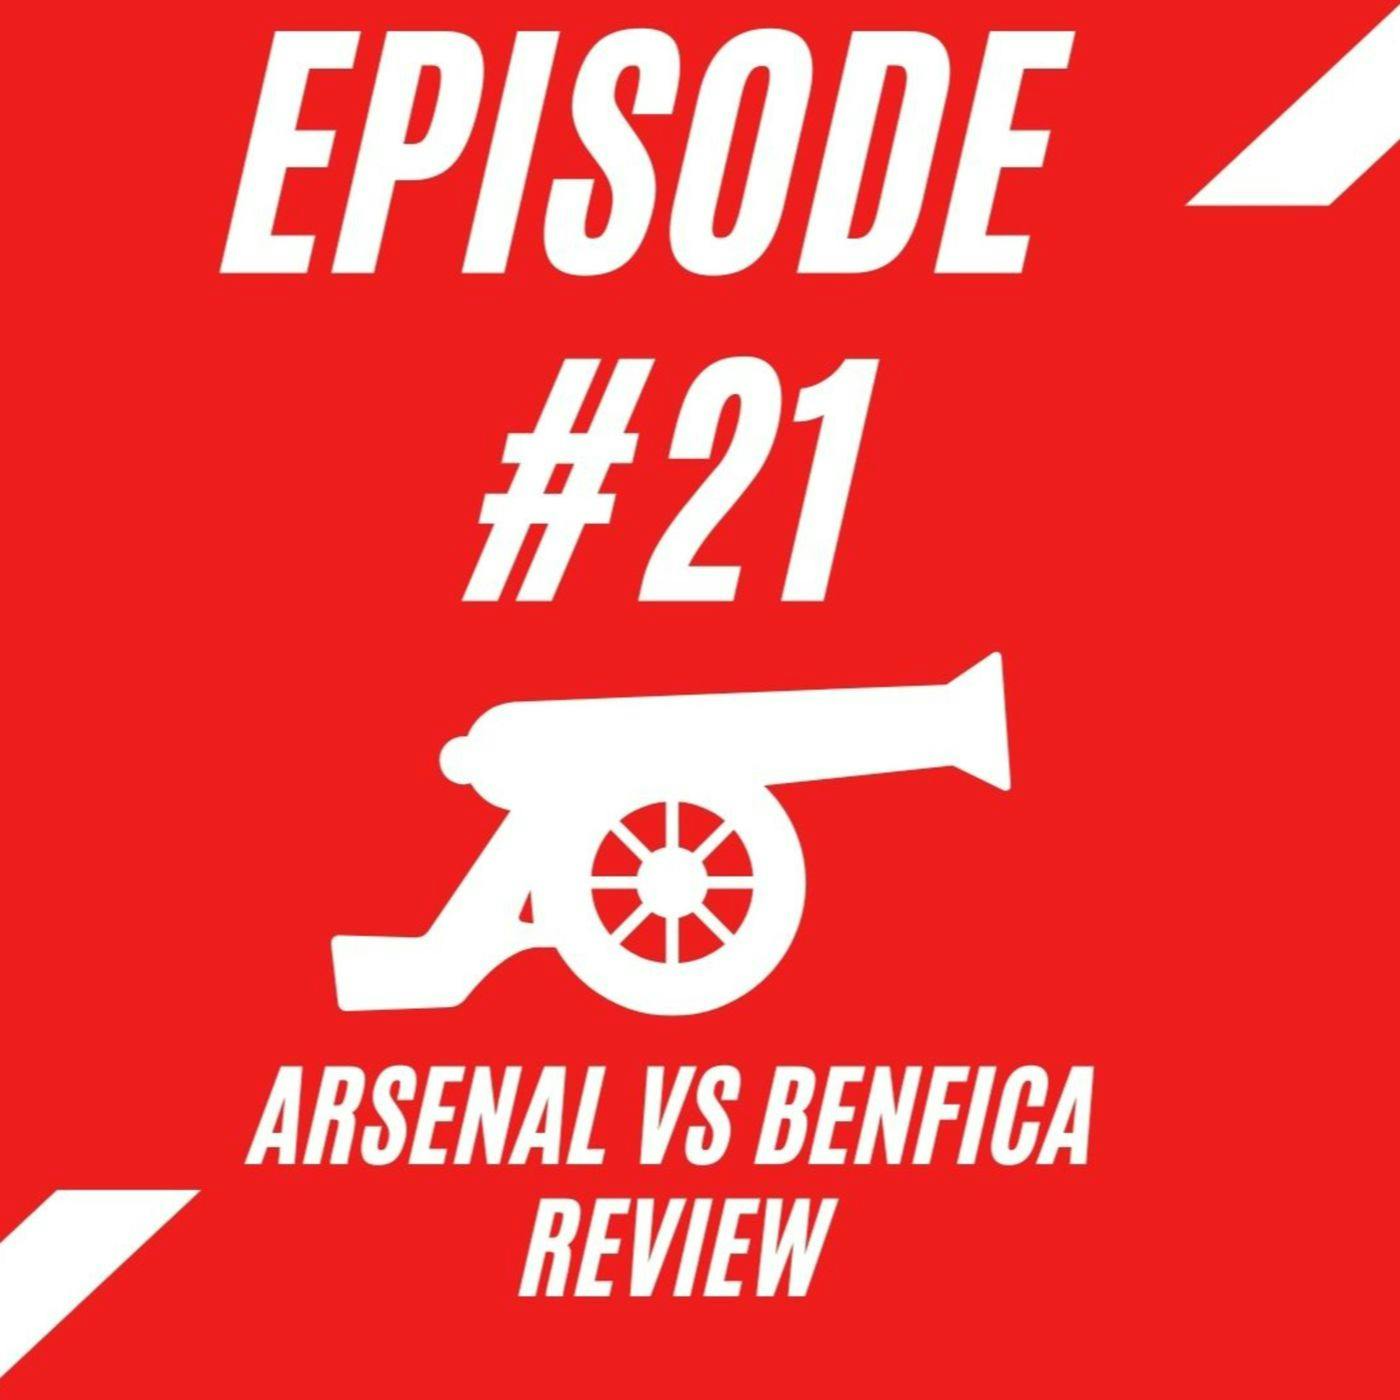 Arsenal vs Benfica - Europa League Round of 32 - Second Leg Review